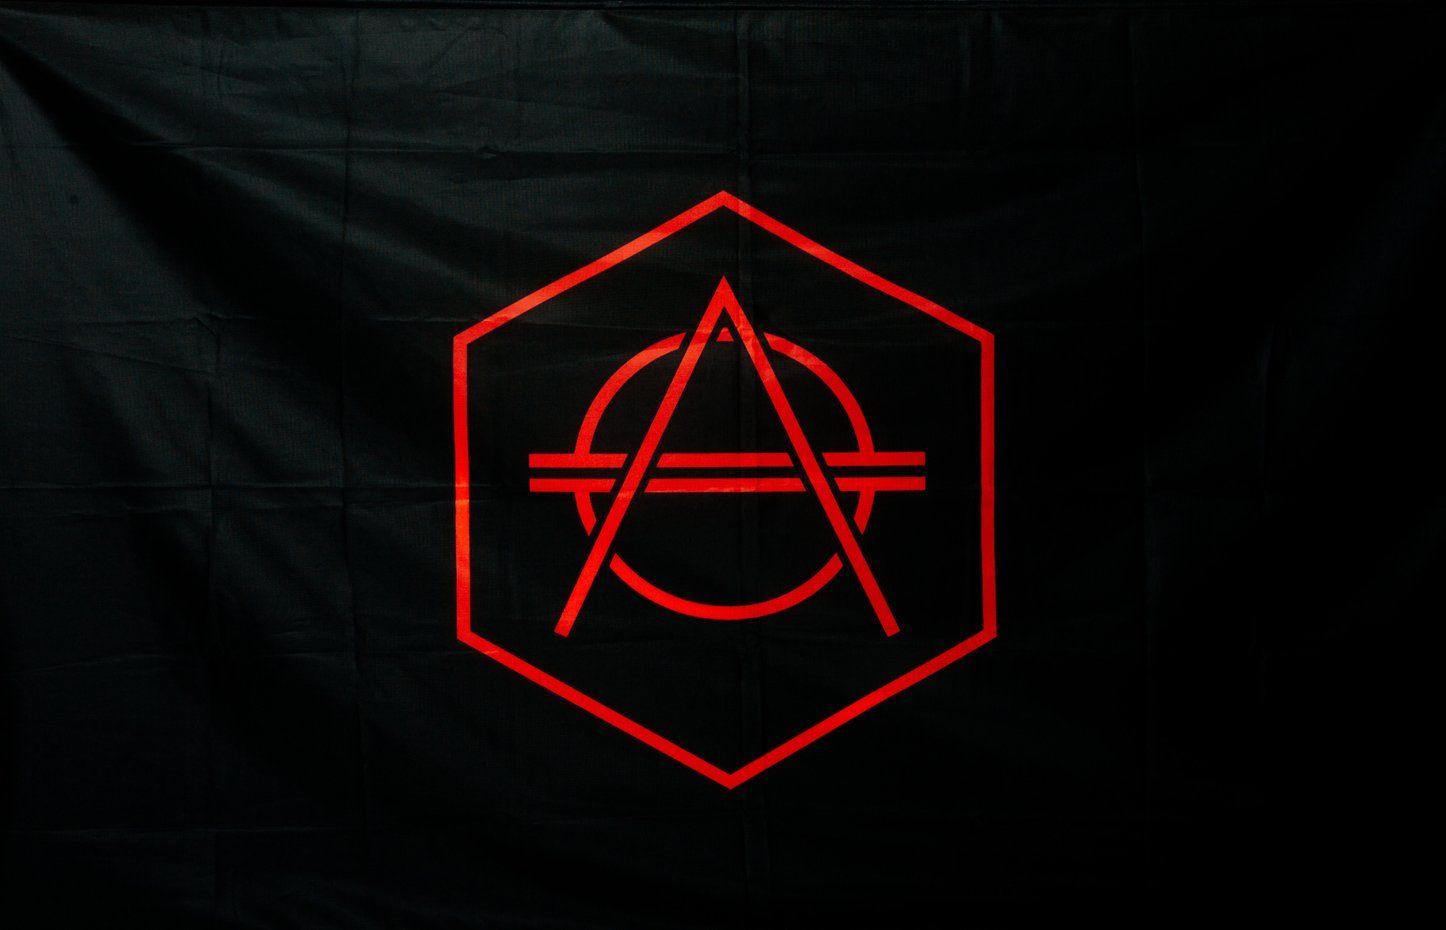 Black and Red Logo - Official Don Diablo Flag black with red logo